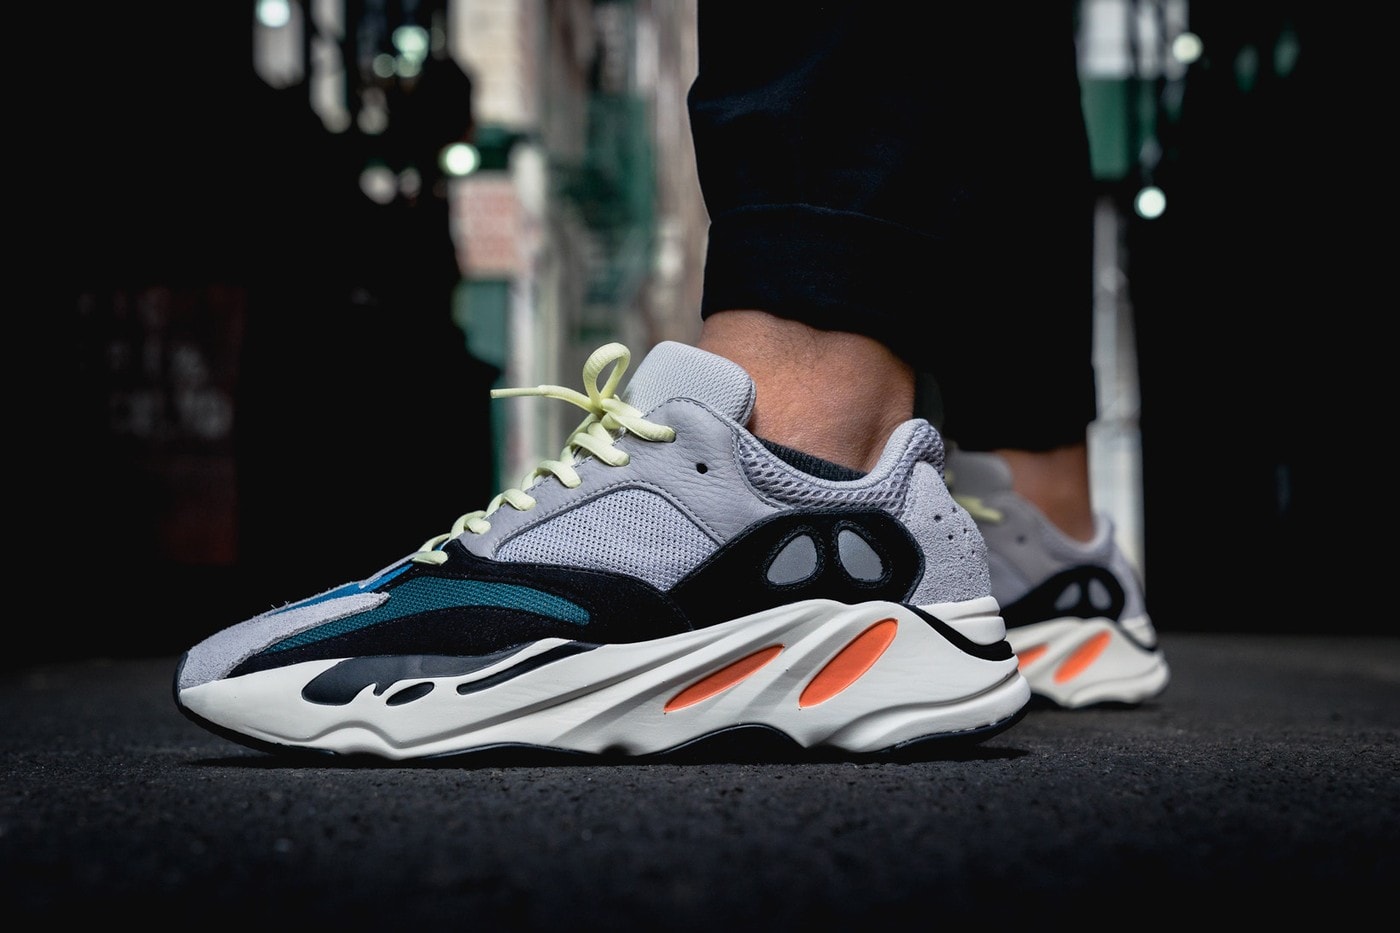 adidas YEEZY BOOST 700 "Wave Runner" Full Family Sizing Release kids sizing infants family kanye west collaborations og sneakers